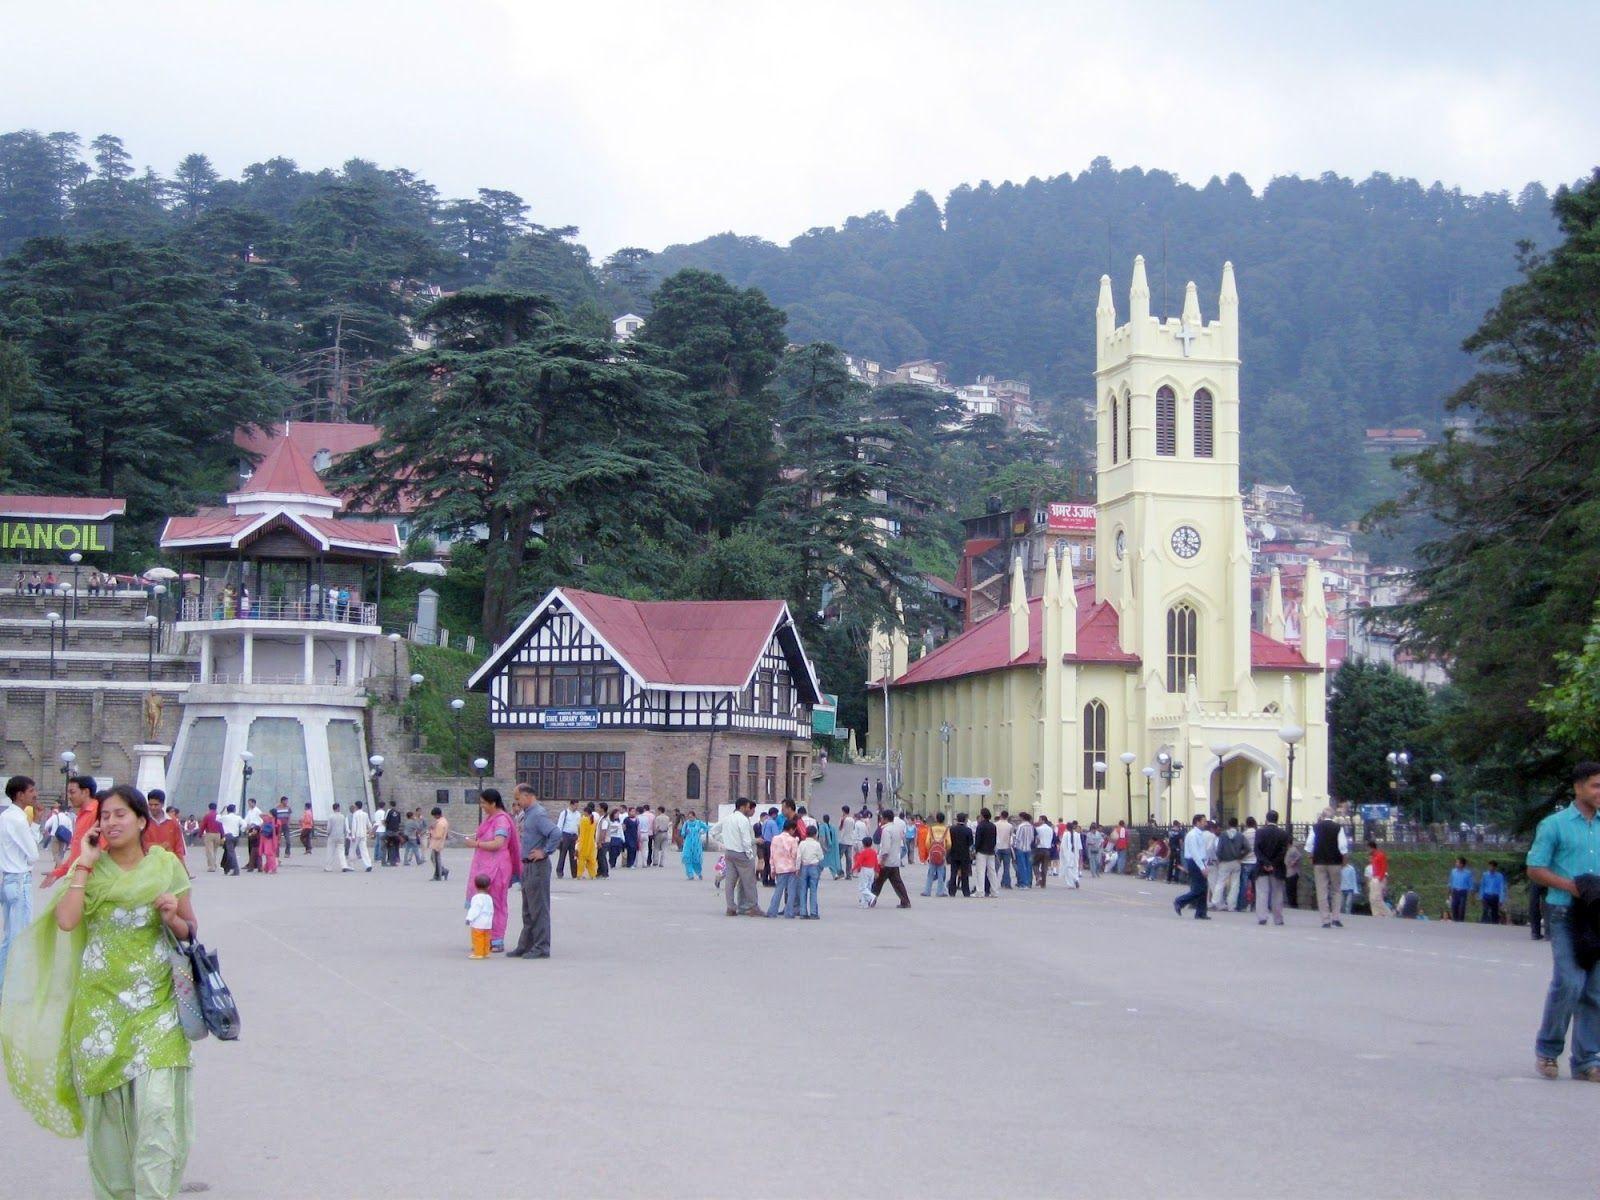 SHIMLA Photos Images and Wallpapers HD Images Near by Images   MouthShutcom